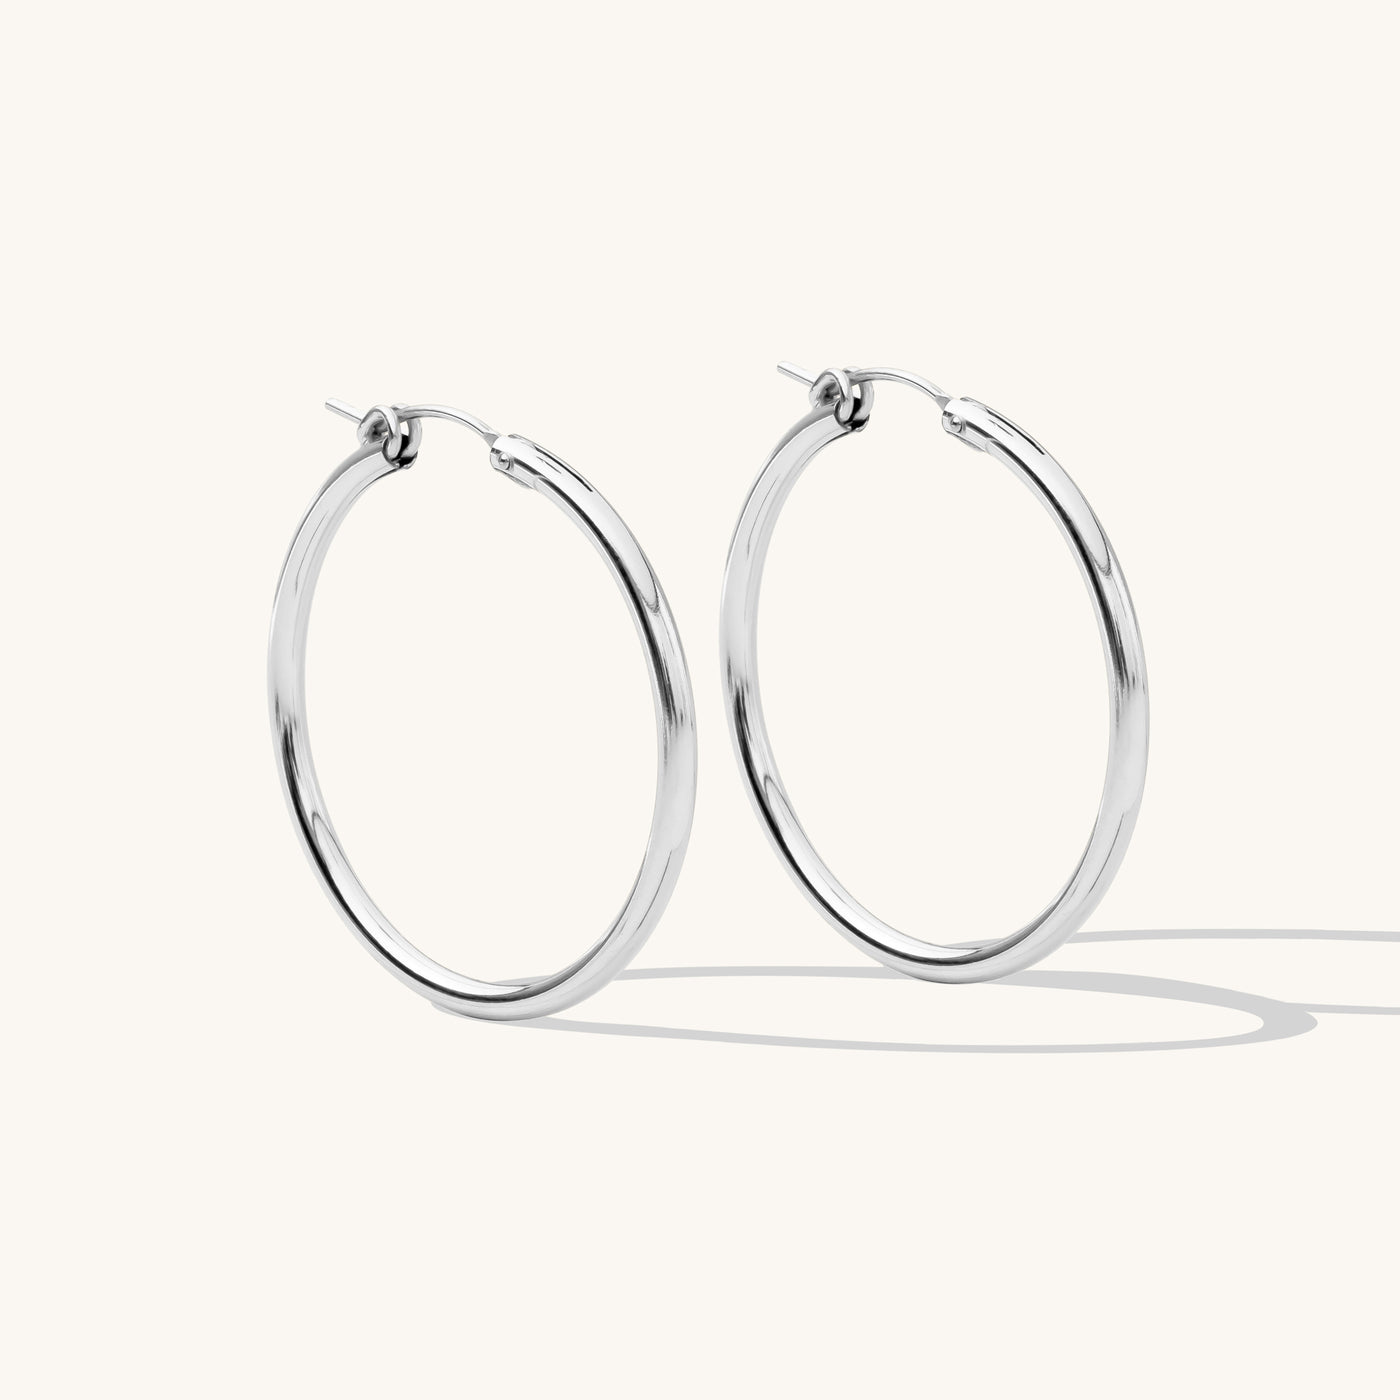 15mm Hoops in 14k Gold Filled or Sterling Silver – Le Serey